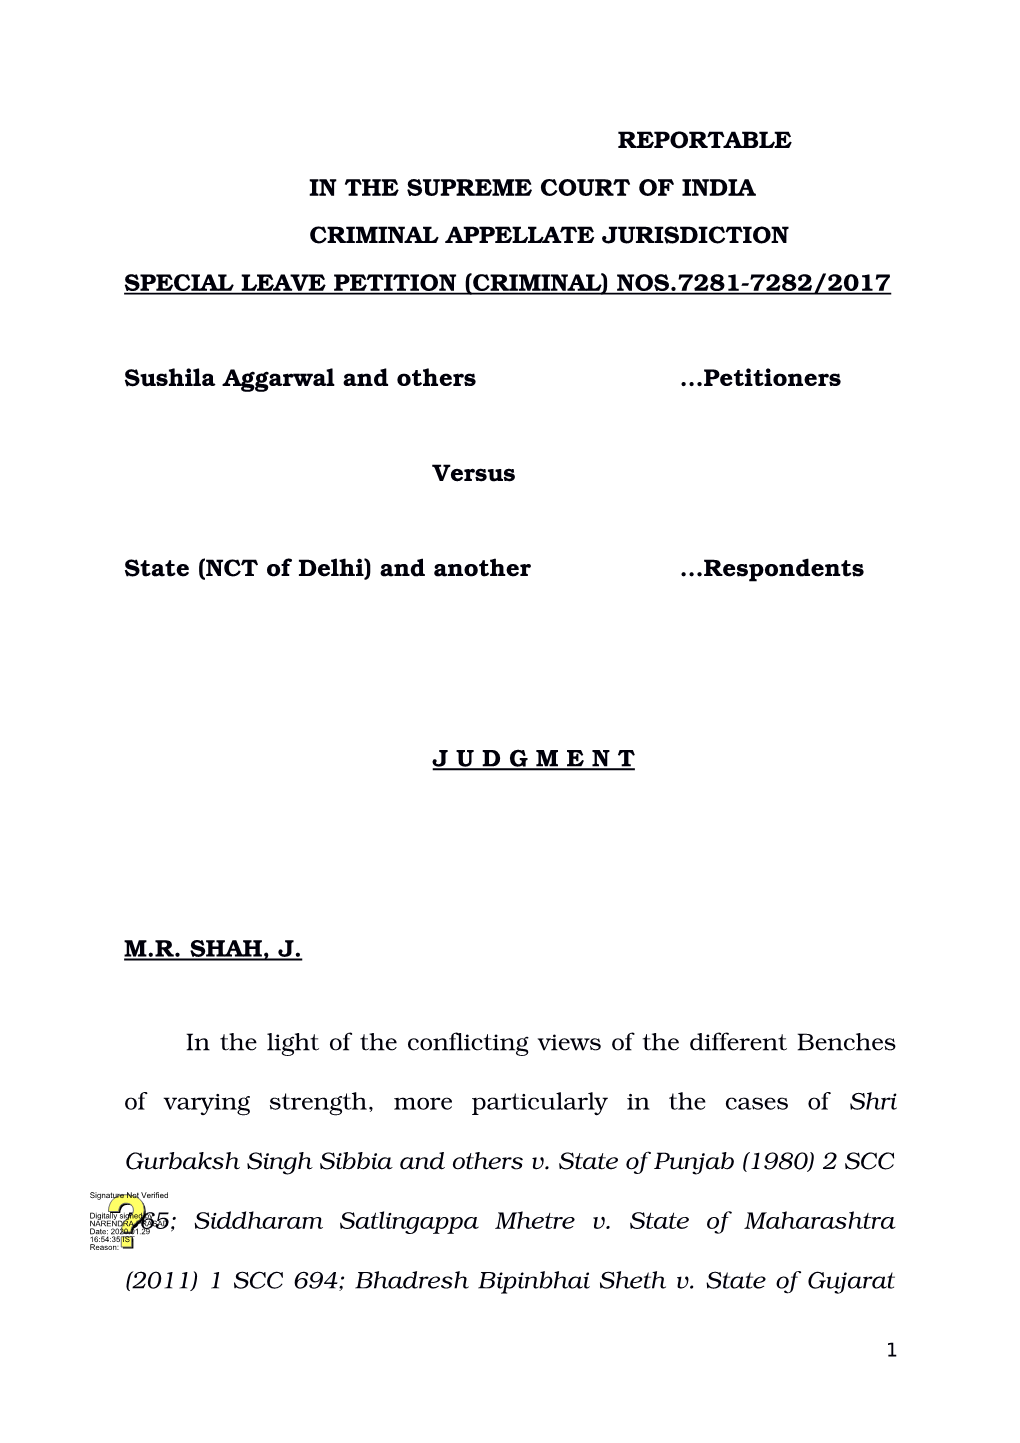 Reportable in the Supreme Court of India Criminal Appellate Jurisdiction Special Leave Petition (Criminal) Nos.7281­7282/2017